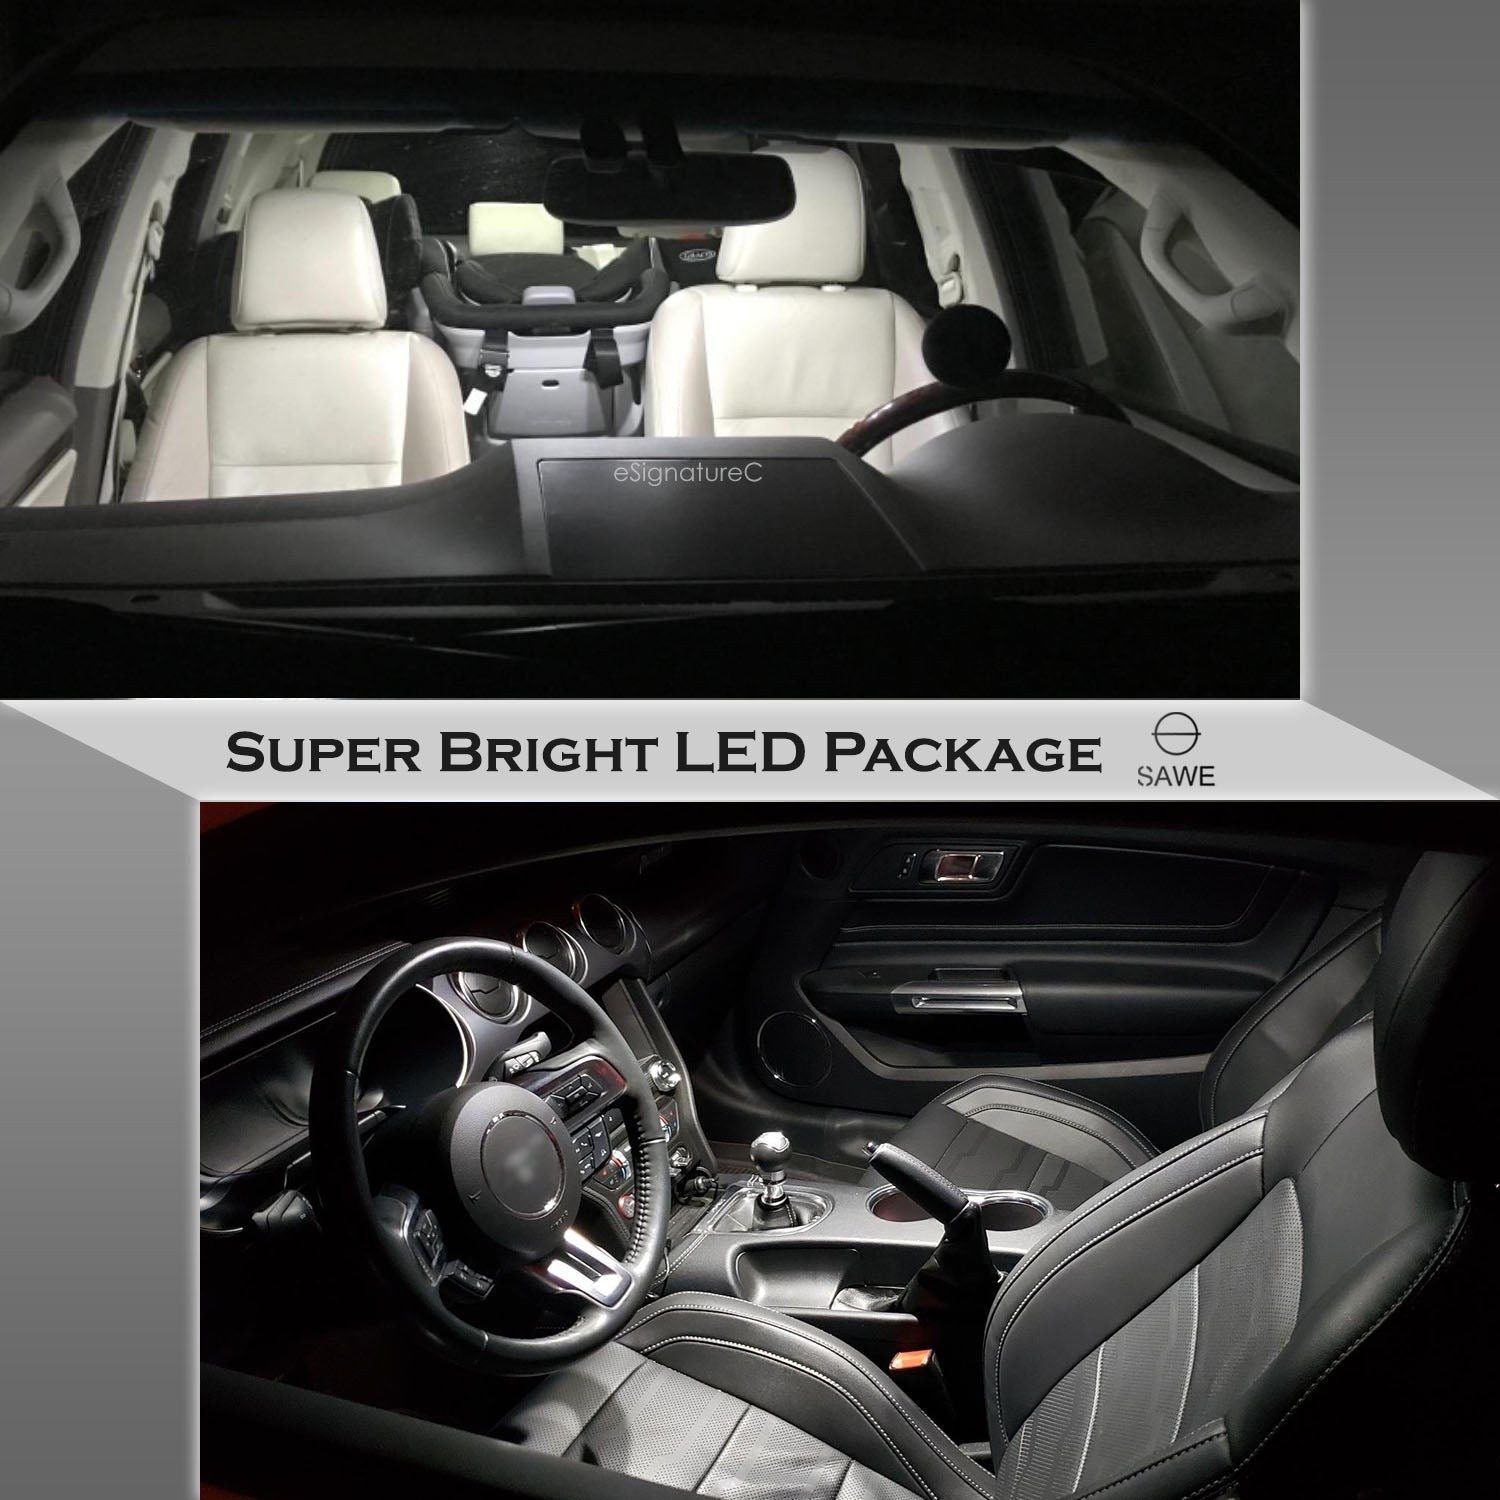 For Ford Focus Interior LED Lights - Dome & Map Light Bulbs Package Kit for 2000 - 2011 - White